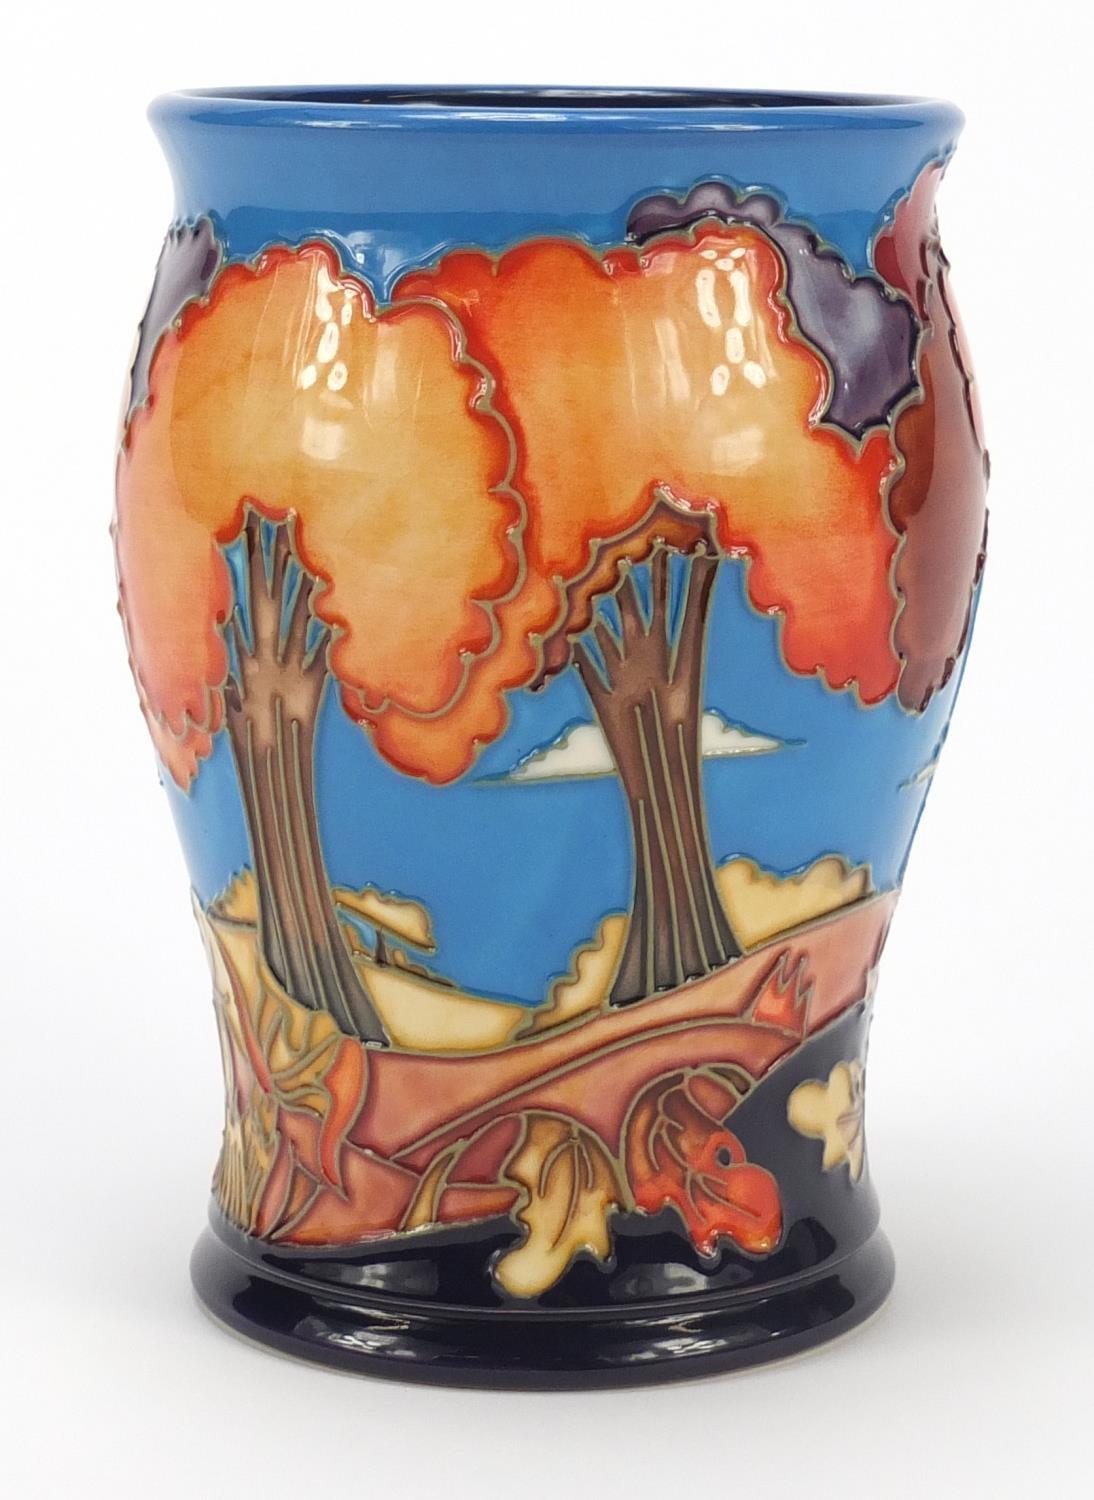 Emma Bossons for Moorcroft, pottery vase hand painted in the Wanderer's Sky pattern, dated 2002, - Image 4 of 9